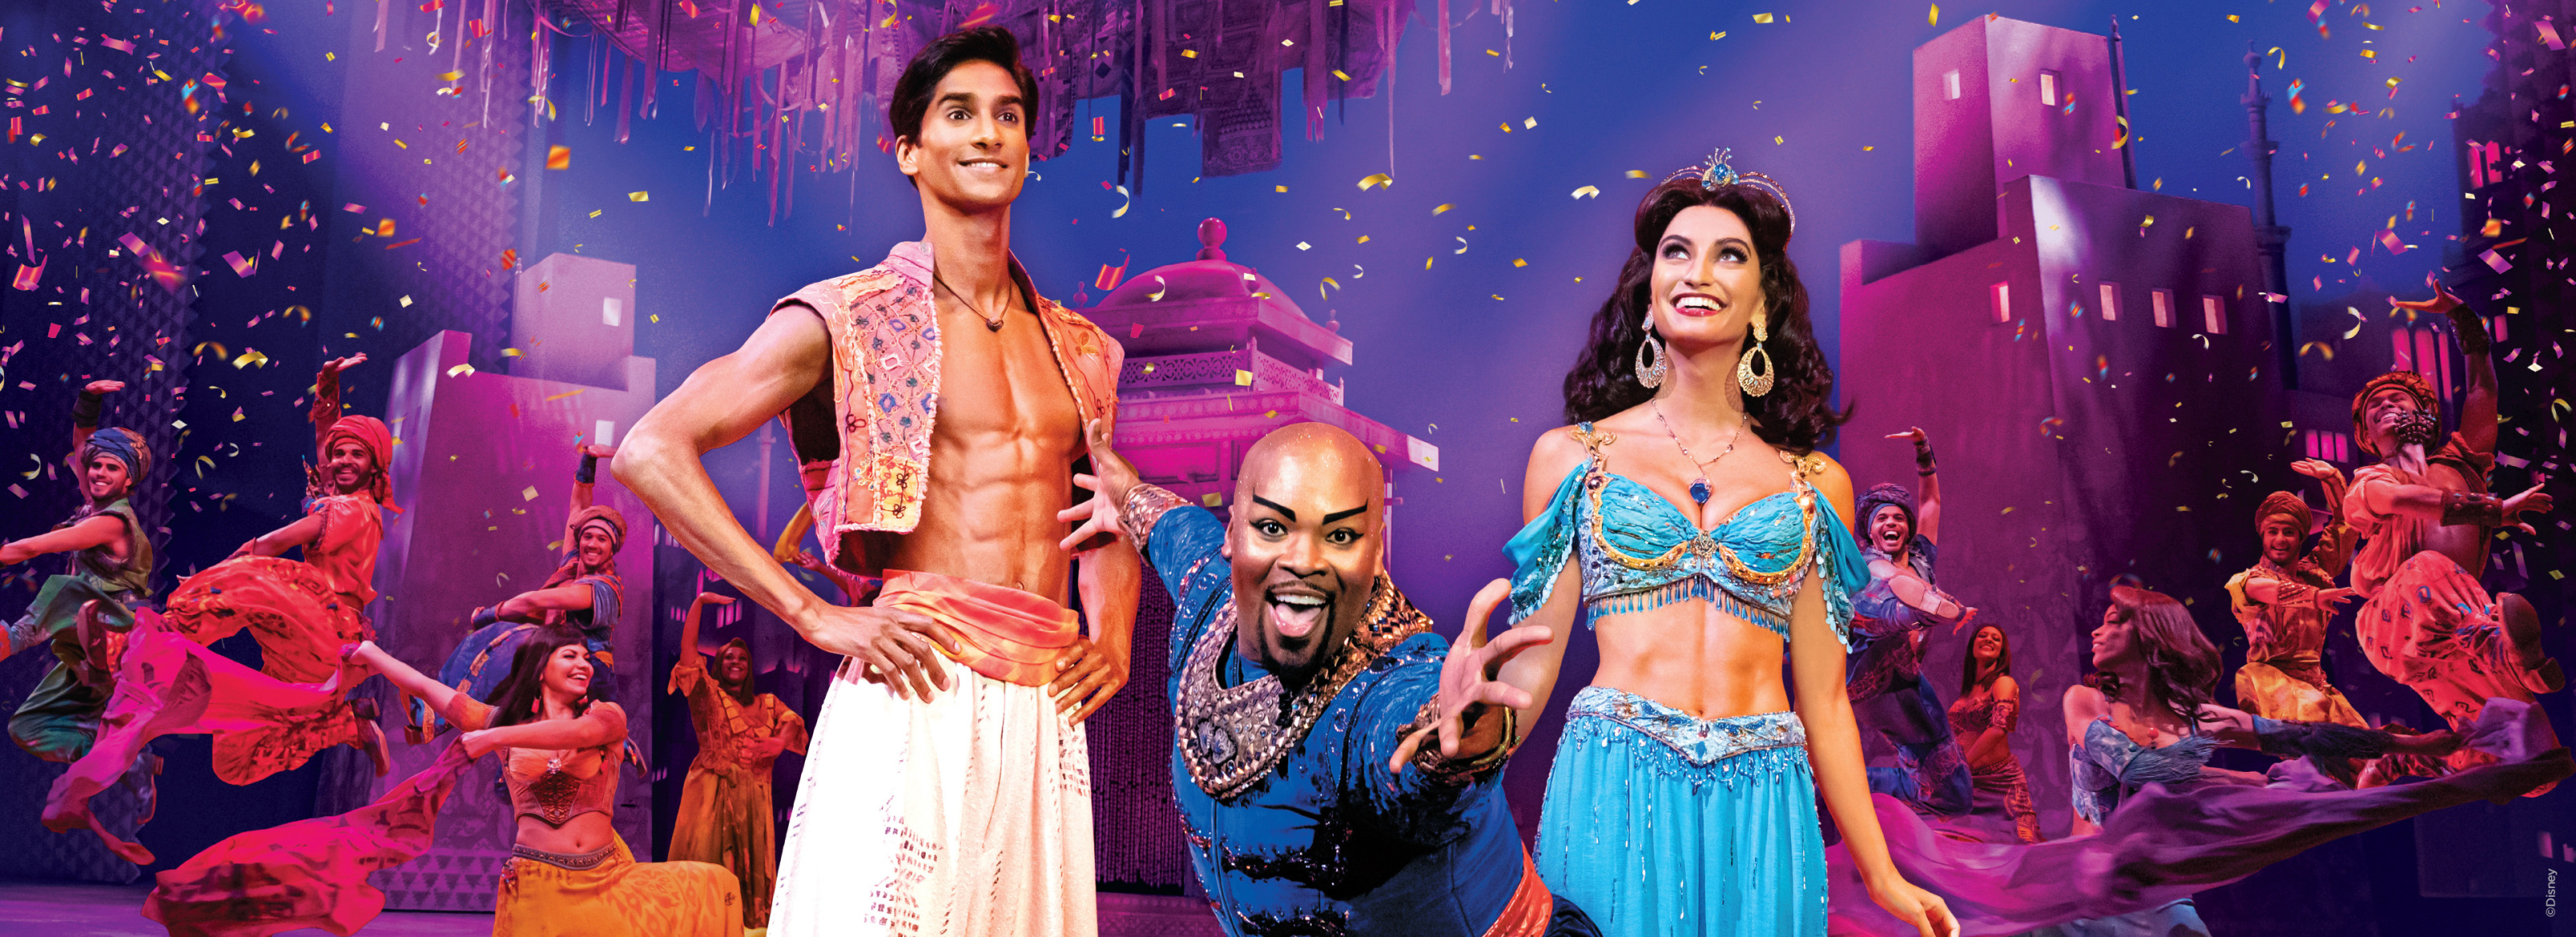 Aladdin and Jasmine on stage during Broadway performance